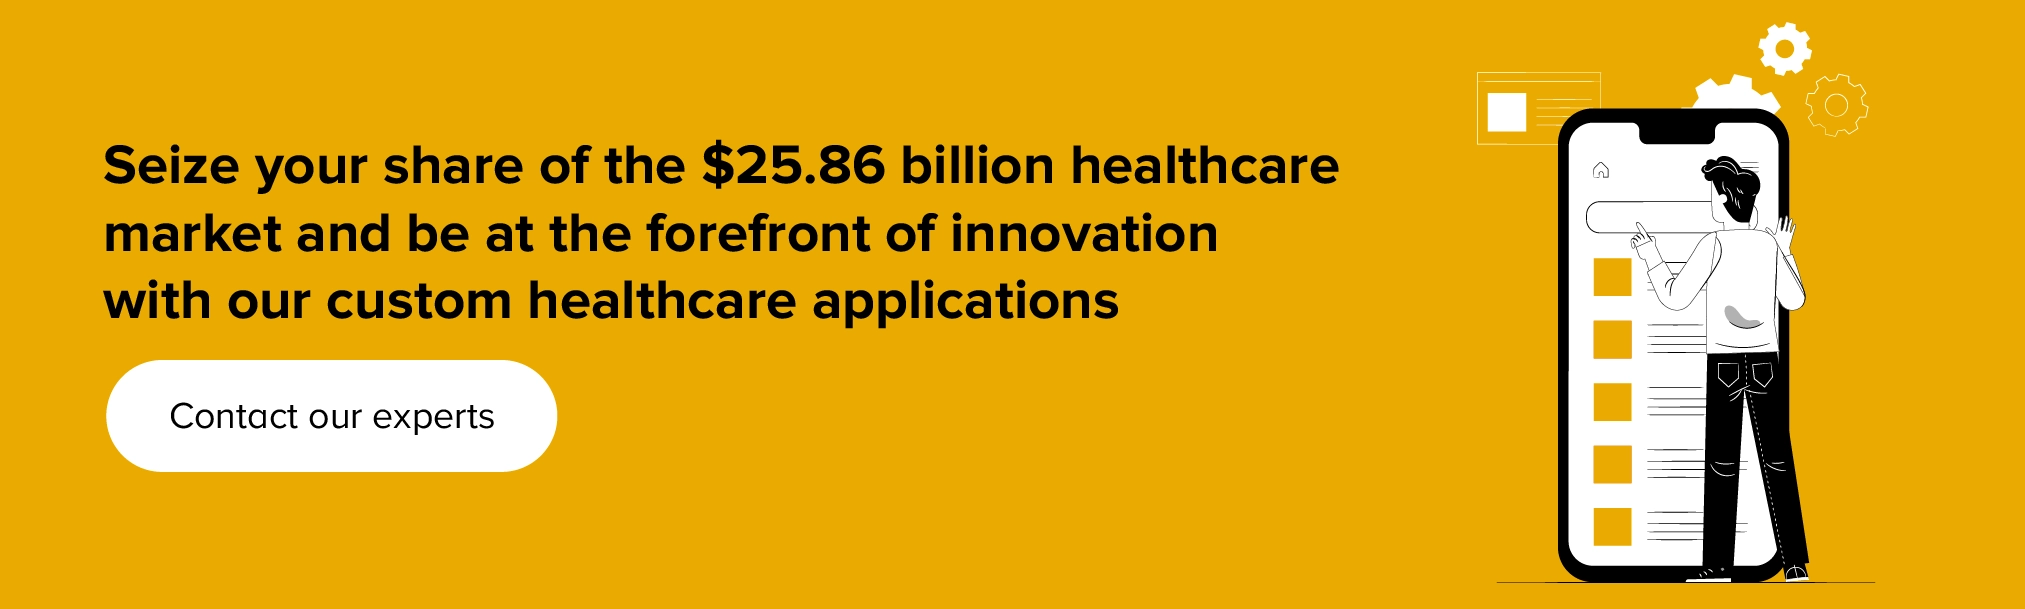 Seize healthcare market share with custom healthcare applications